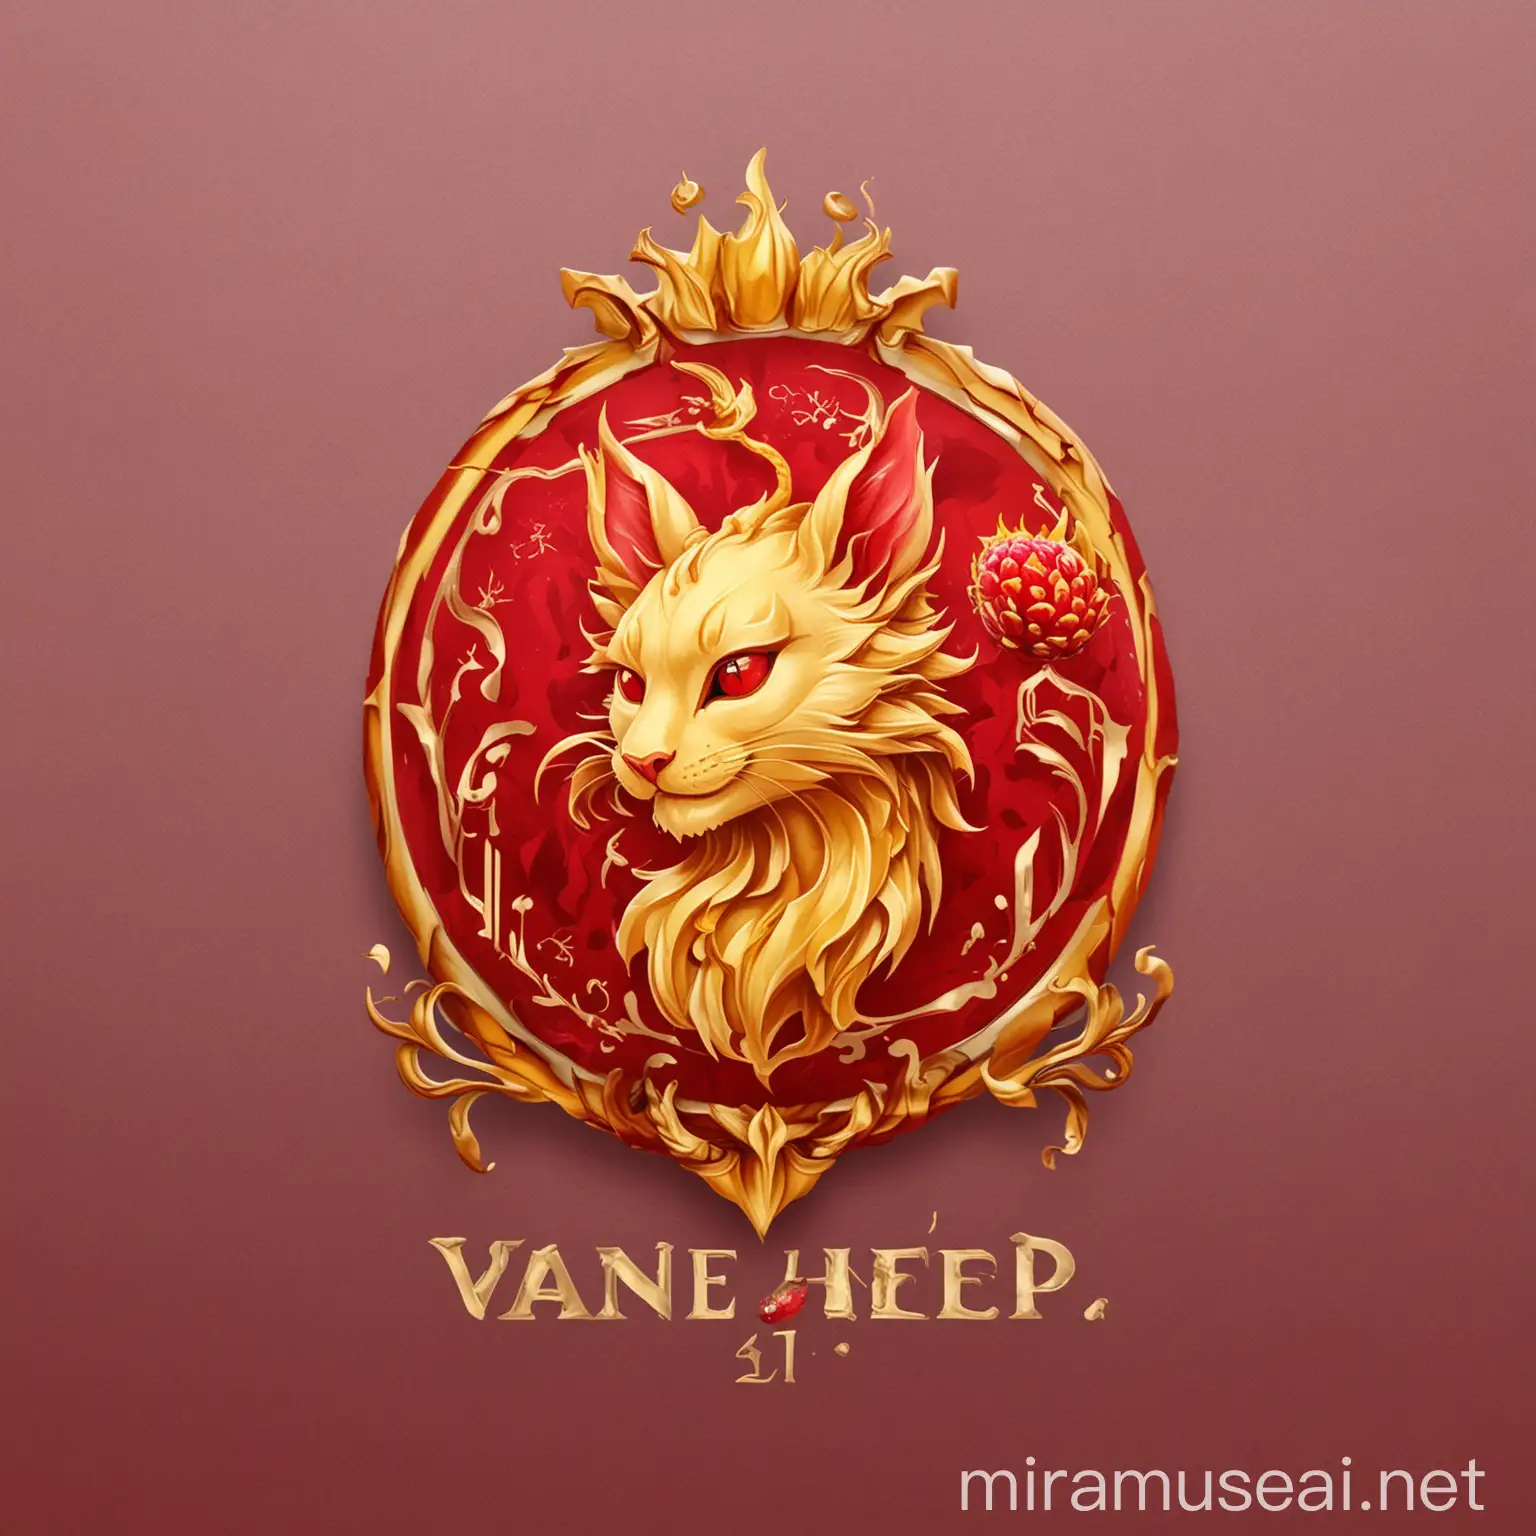 logo design on request: with the word "Van Hiep", elegant, luxurious, red and yellow logo, logo with dragon fruit, logo with cat



